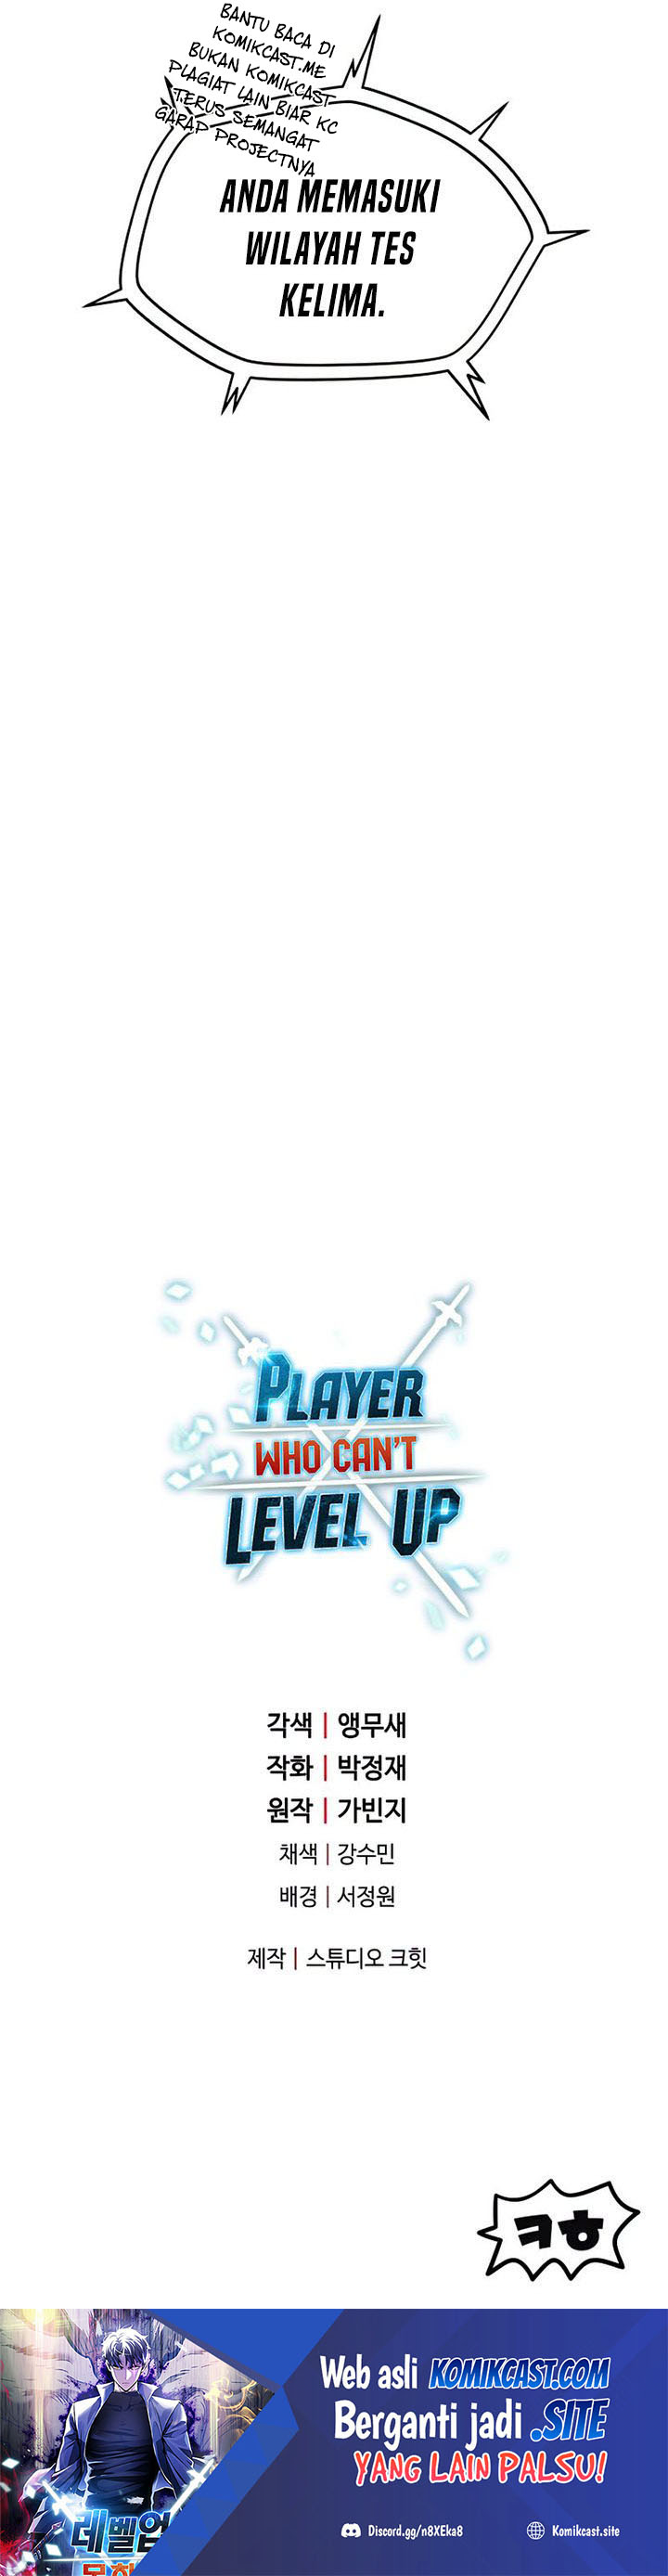 Player Who Can’t Level Up Chapter 72